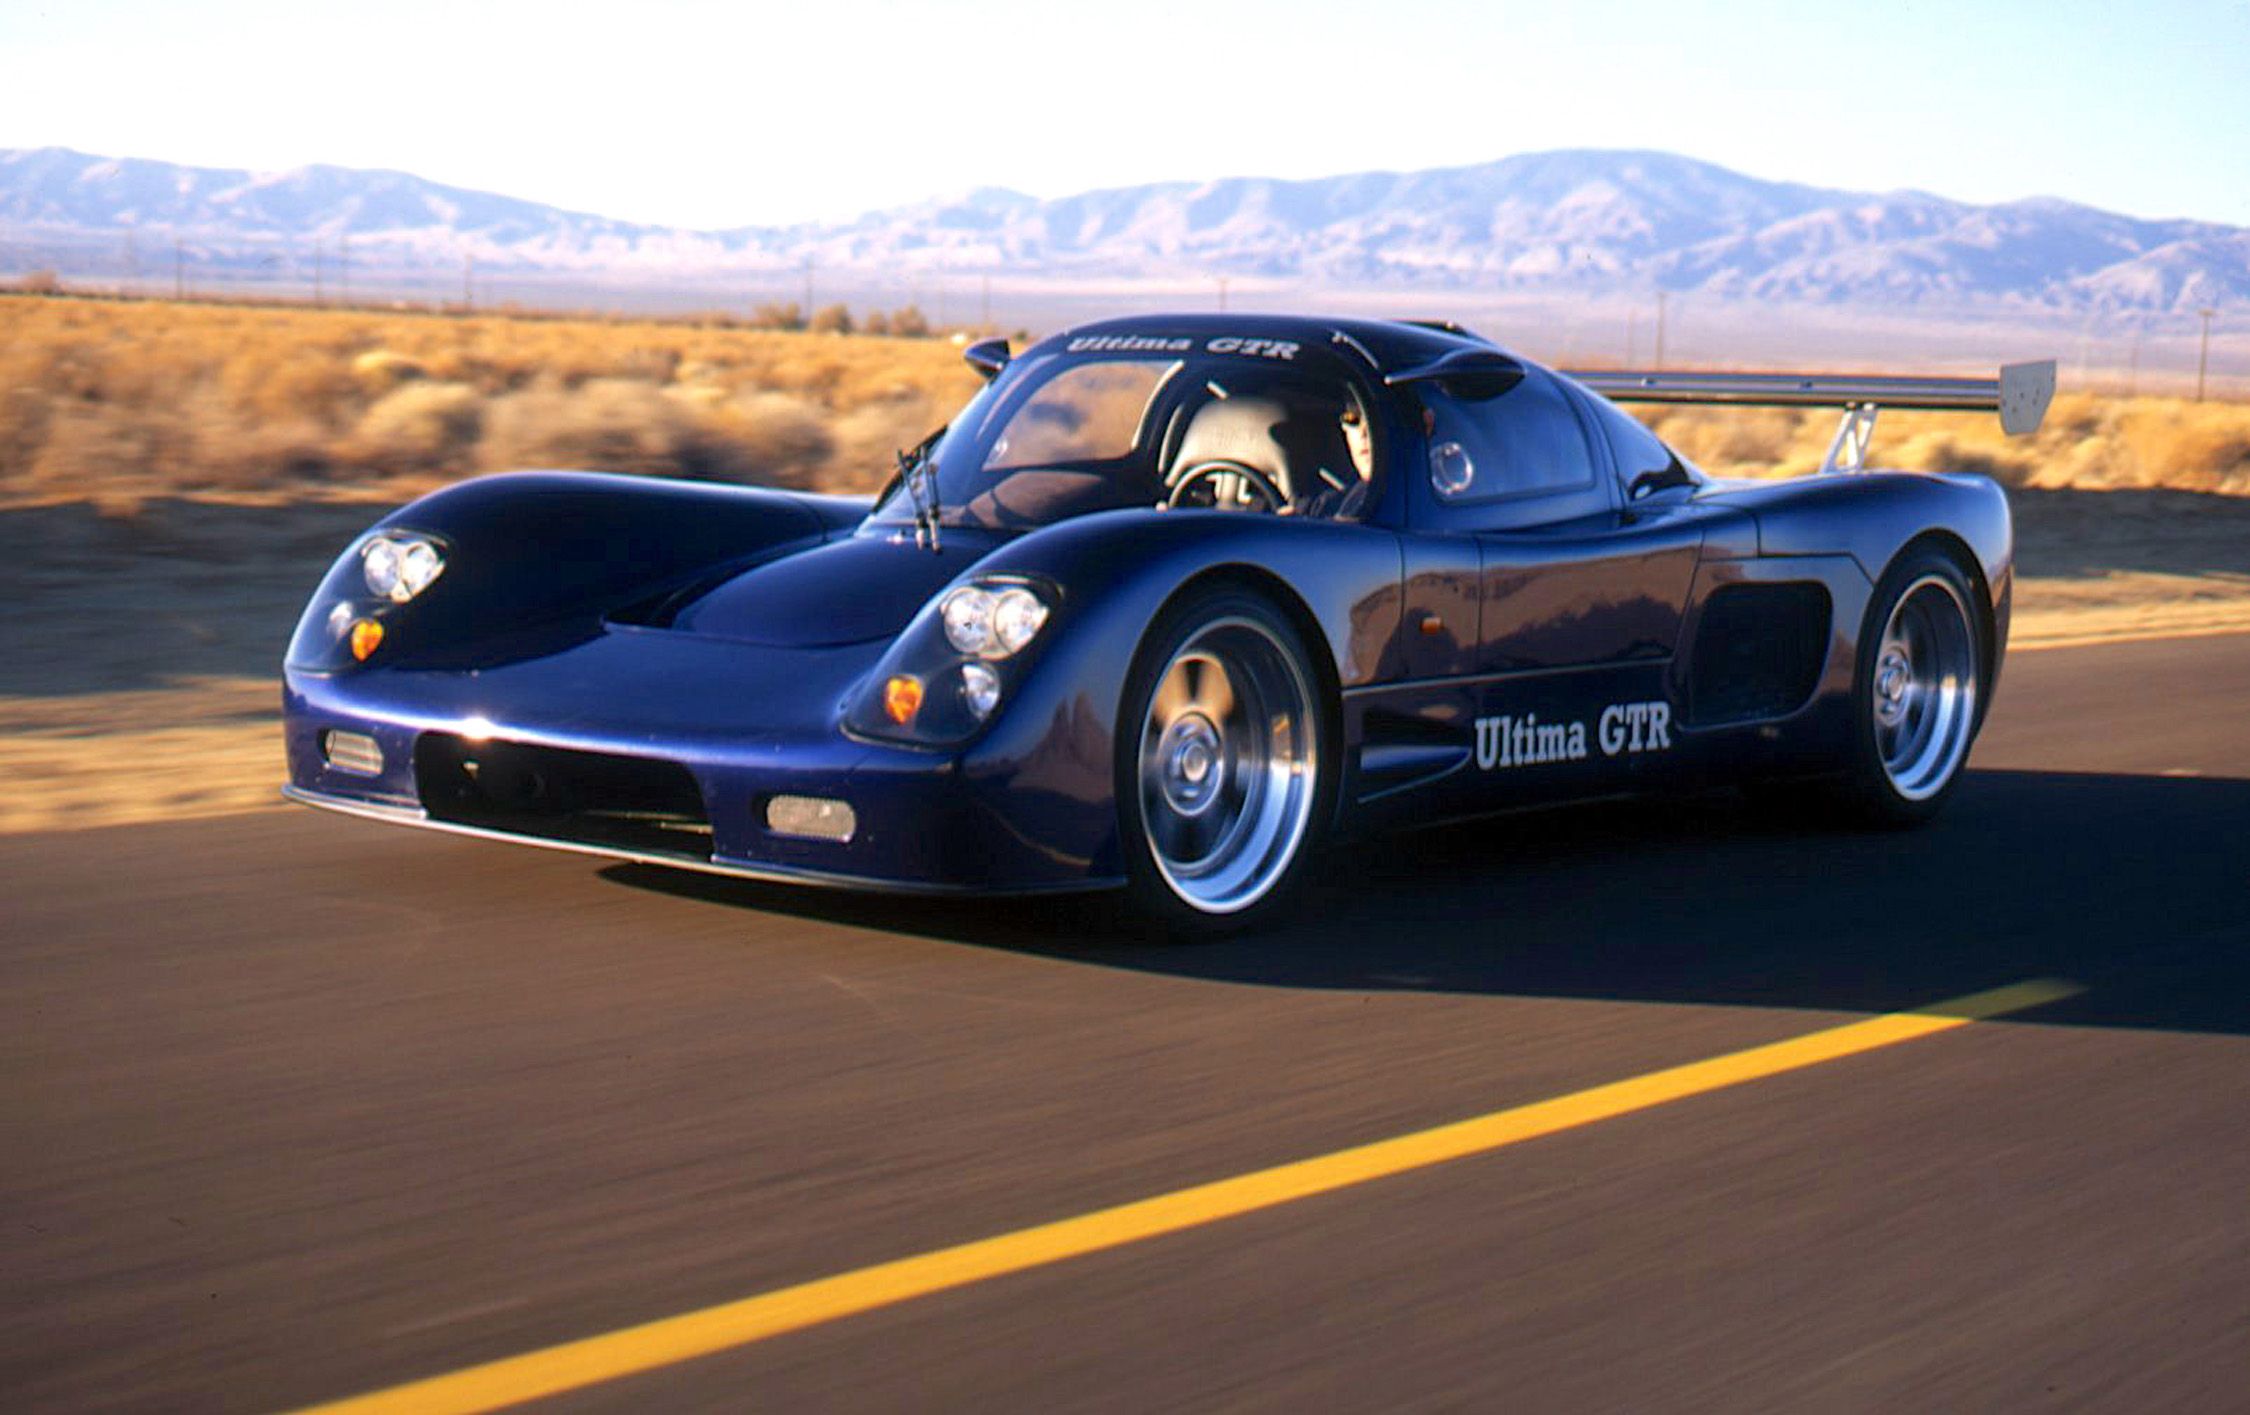 2000 Ultima GTR: Absolute Madness